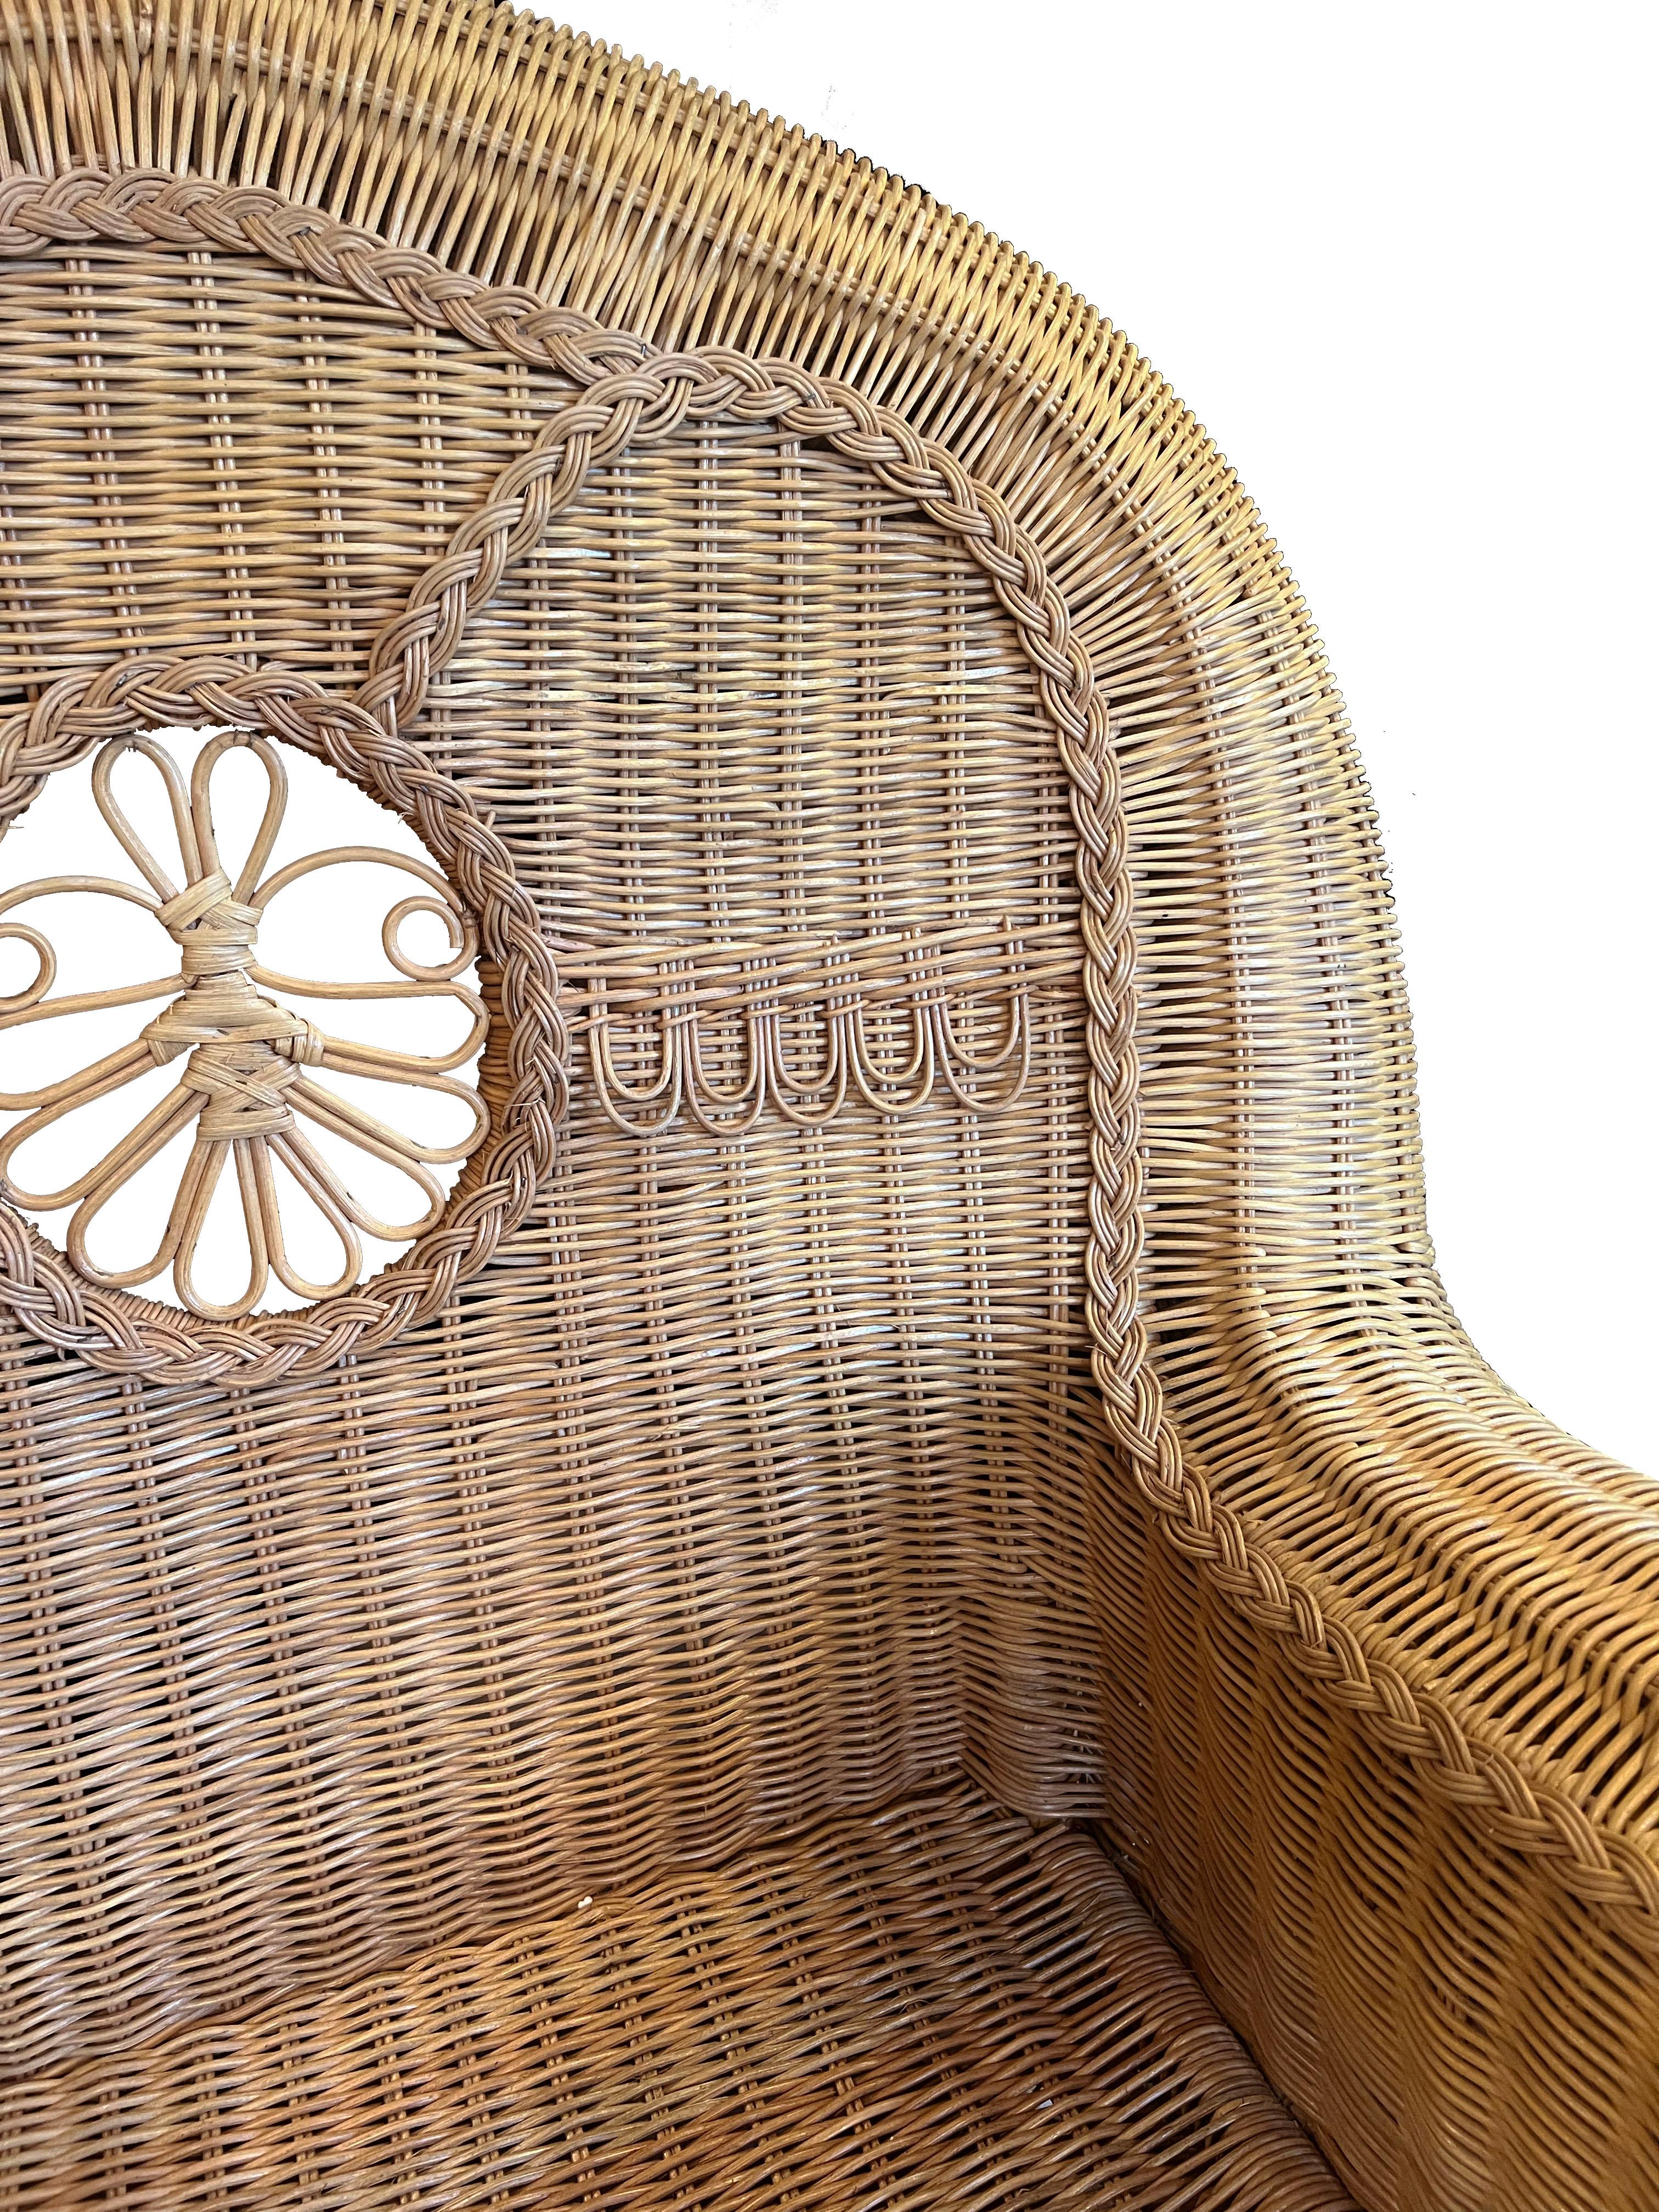 20th Century Pair of Large Wicker Armchairs; The Collection of Andre Leon Talley For Sale